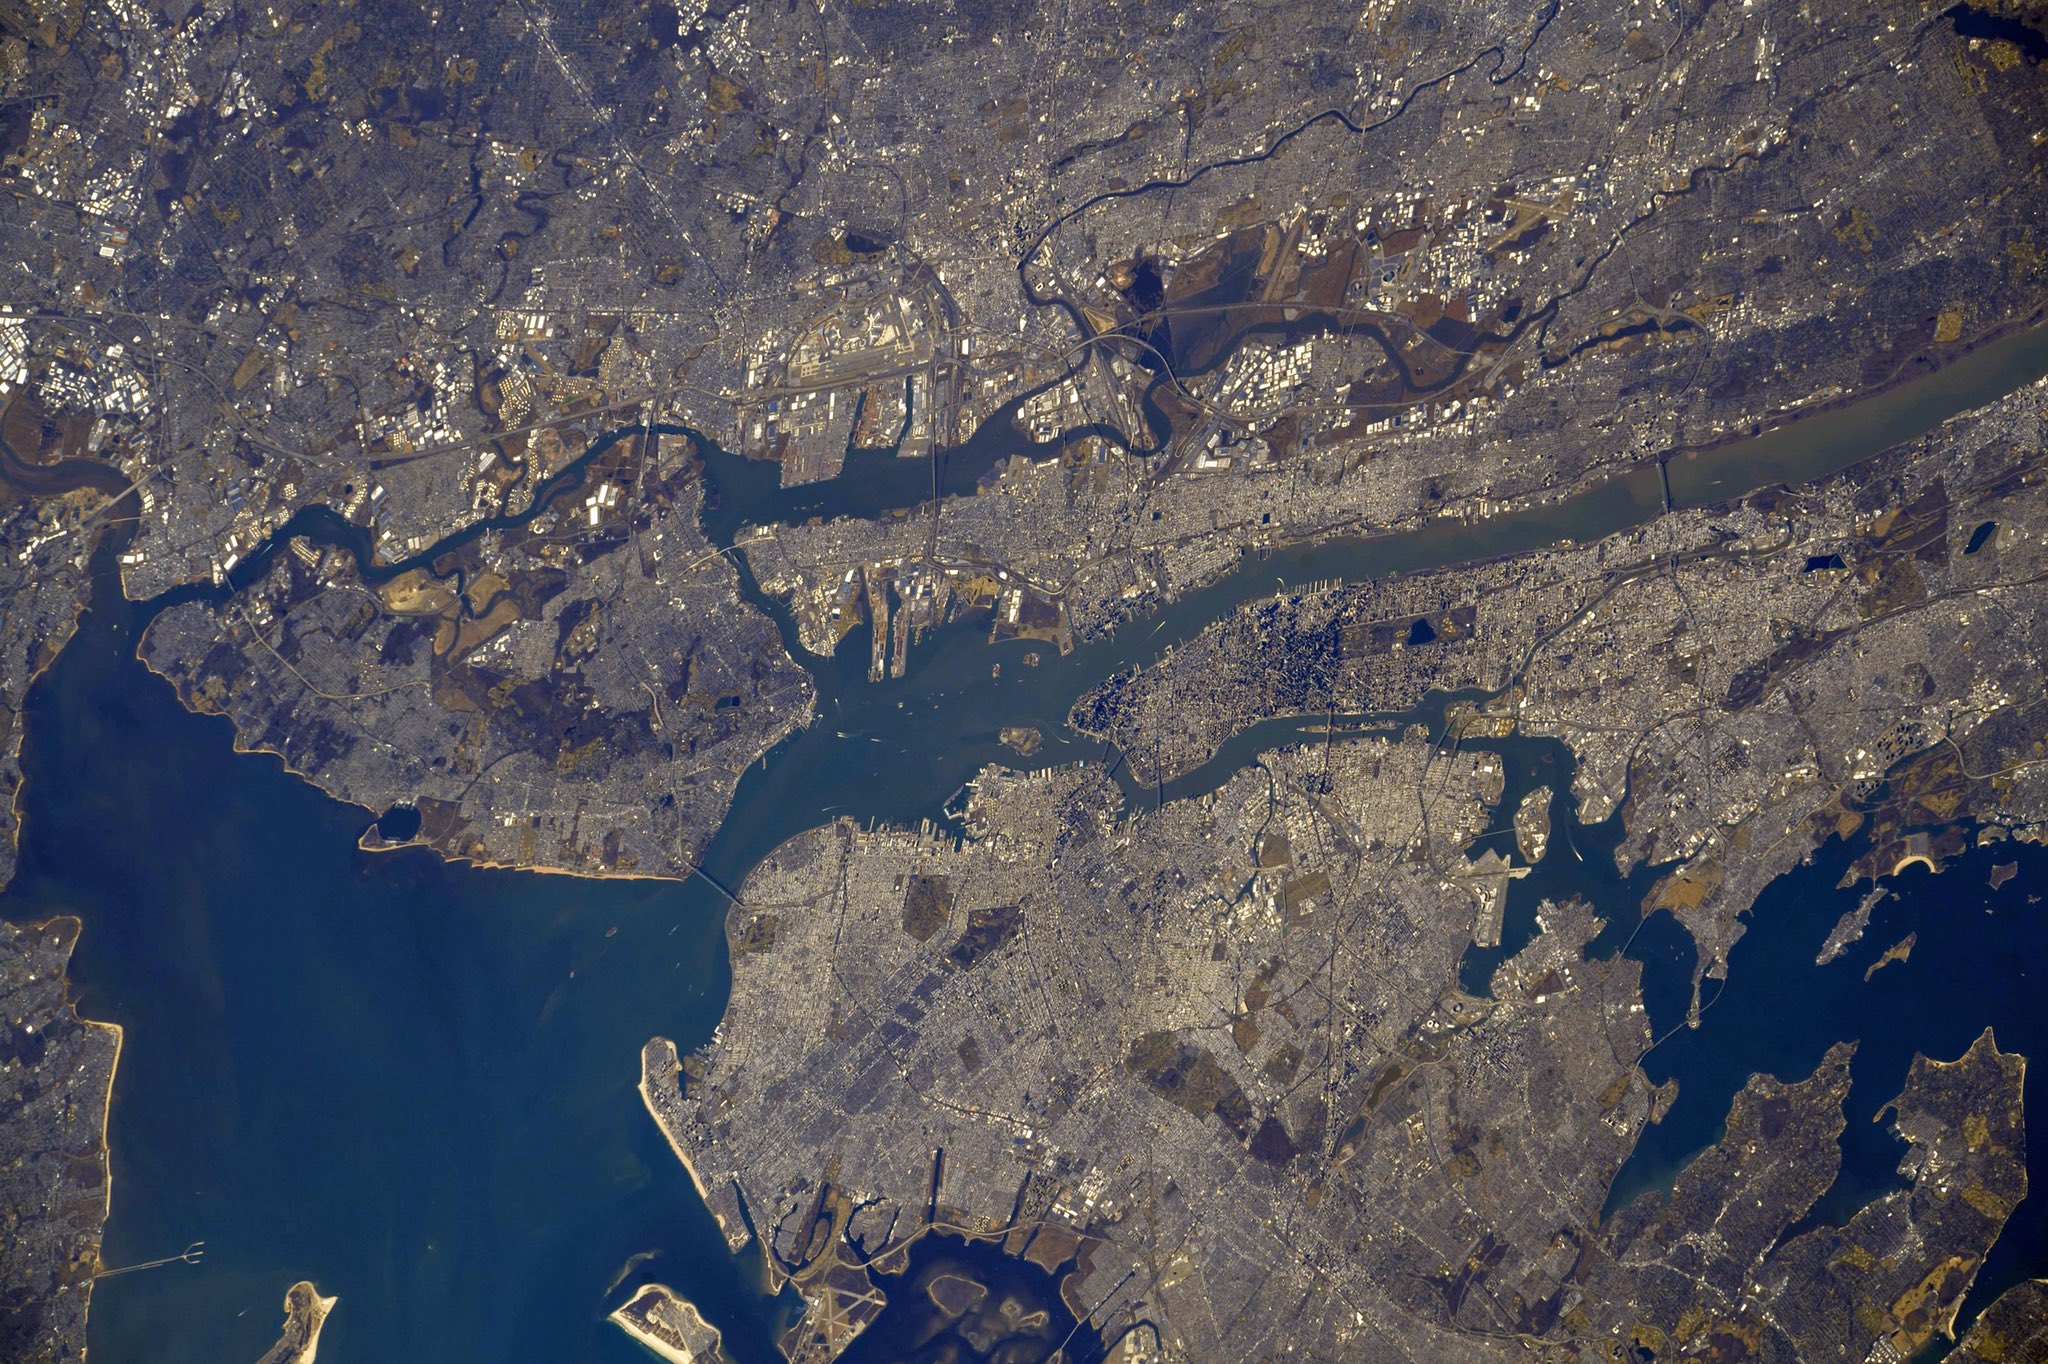 New York City image from the International Space Station